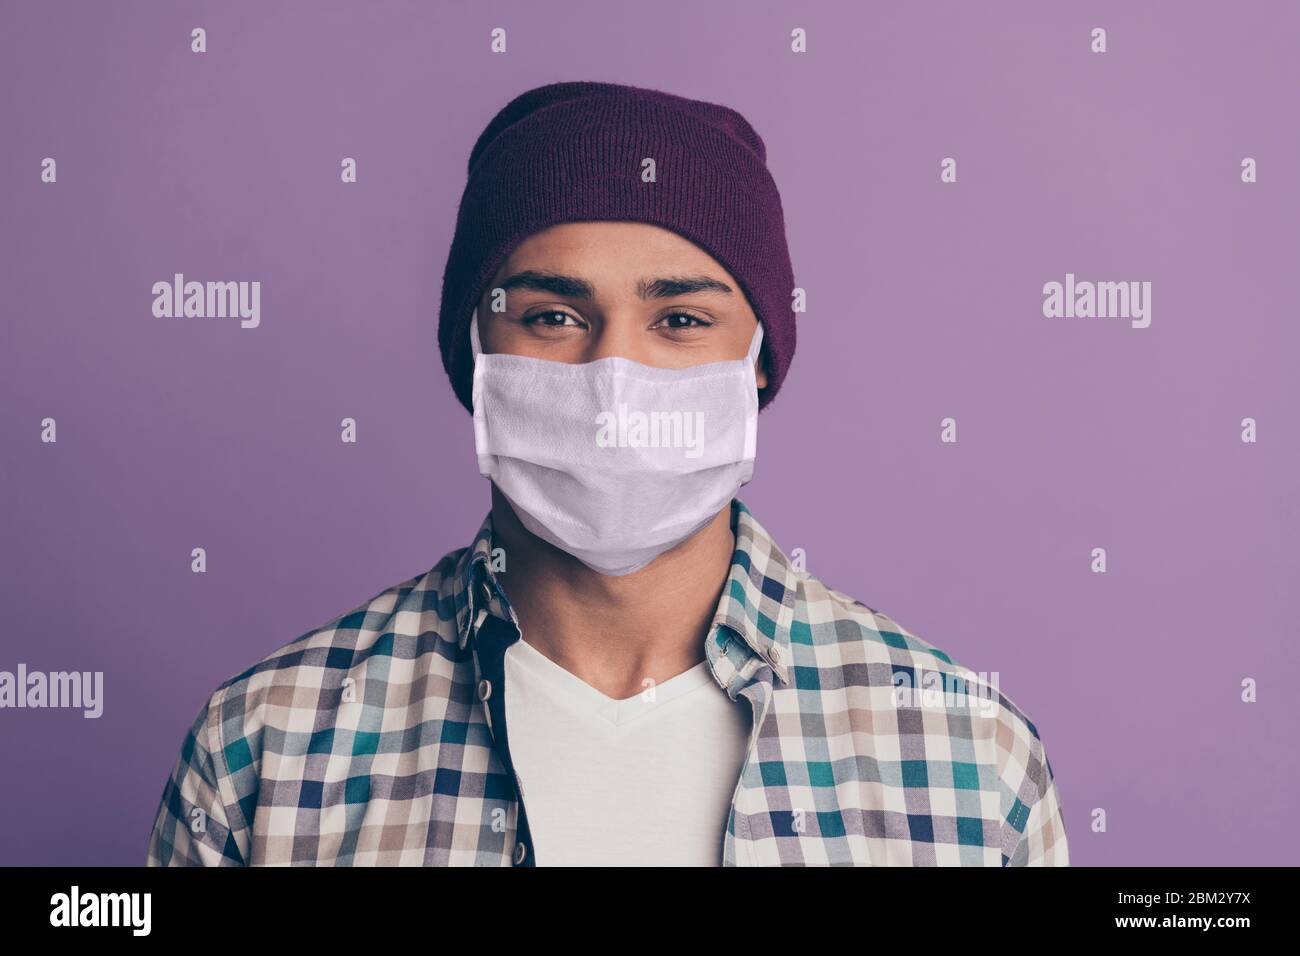 Close up photo amazing funky macho guy stay home covid-19 quarantine look wearing medical mask casual plum color headwear checkered plaid shirt Stock Photo